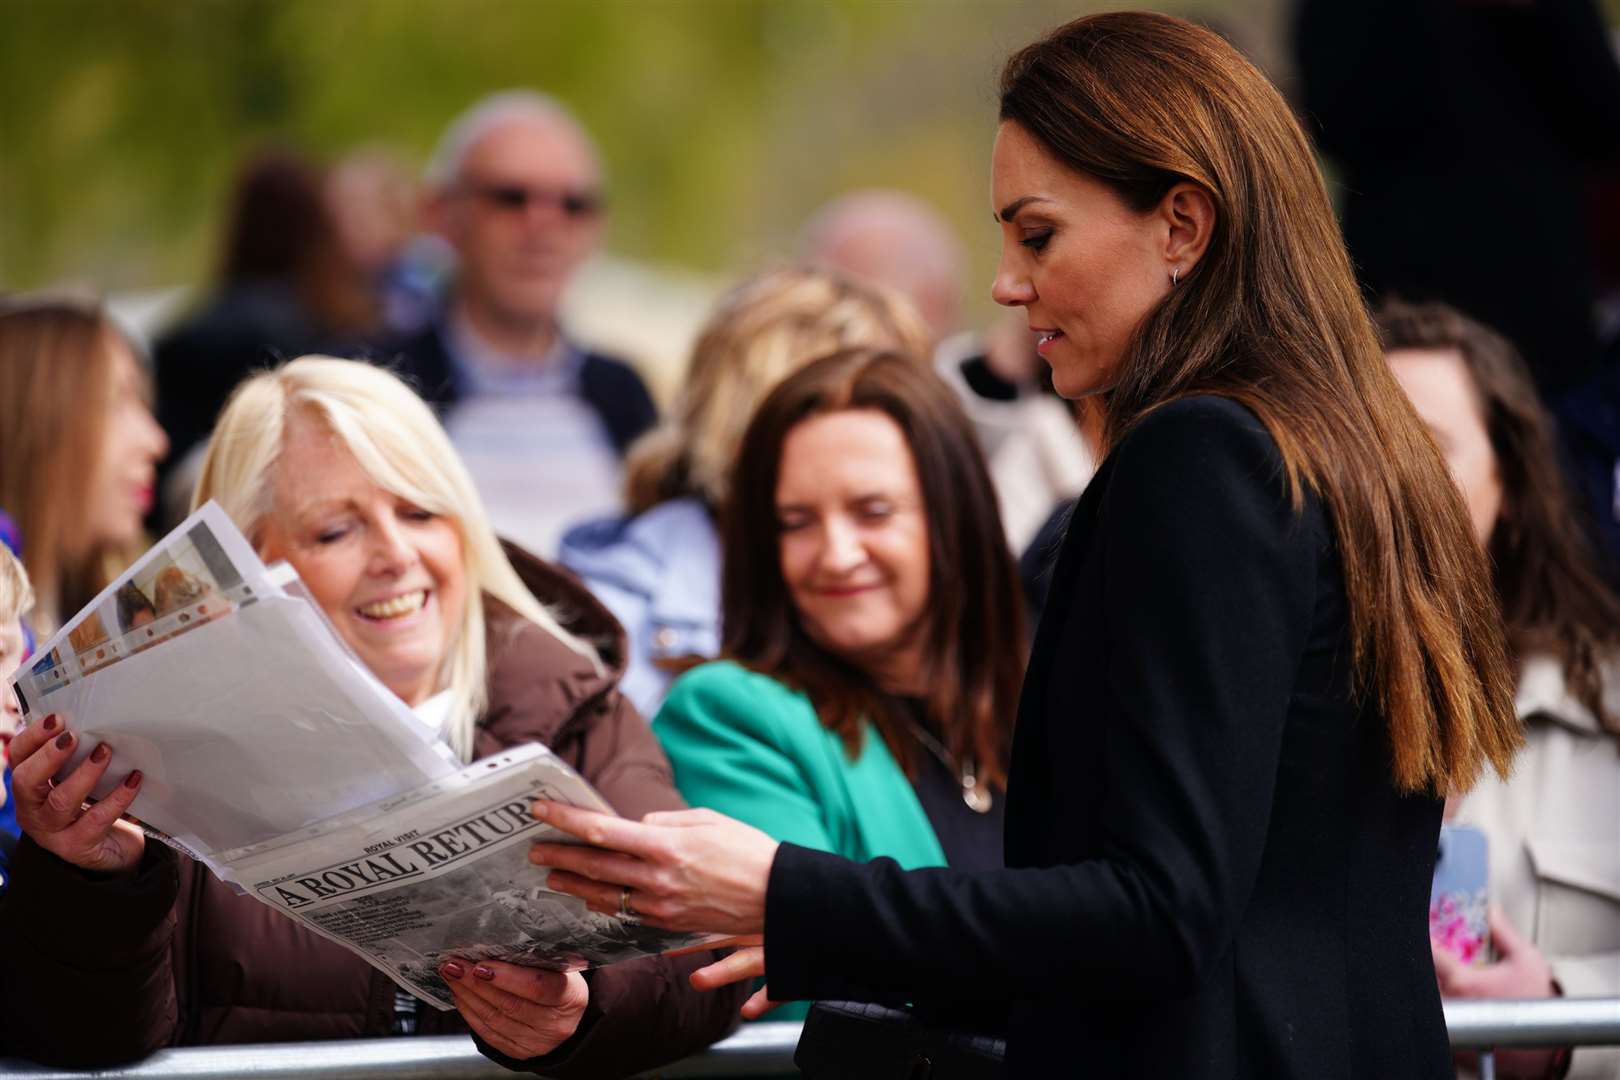 The Princess of Wales speaks to onlookers during her visit to the Aberfan memorial garden (Ben Birchall/PA)